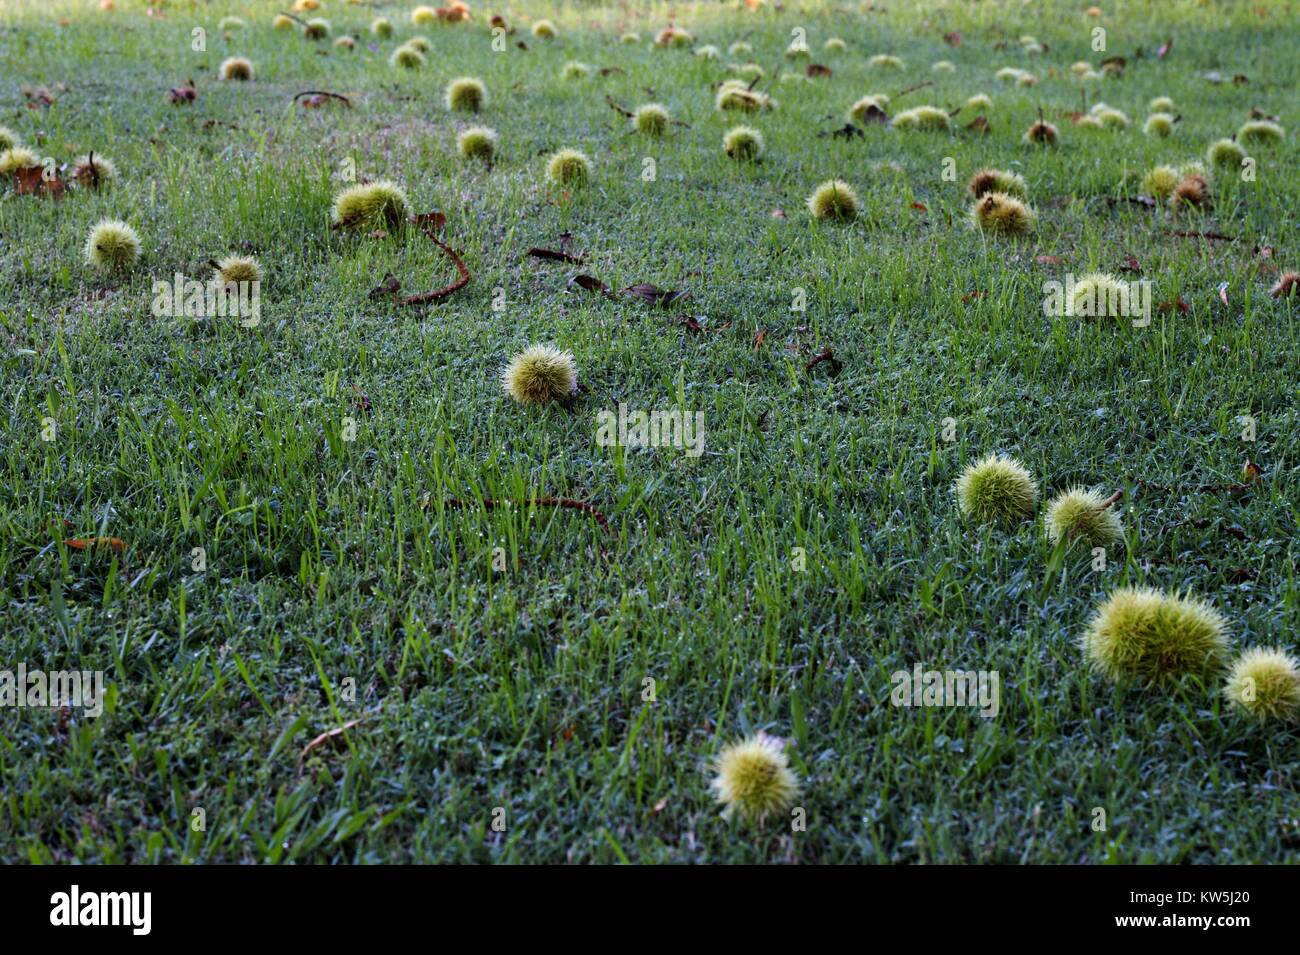 Spiky green fruit from a sycamore tree laying across green grass. Stock Photo